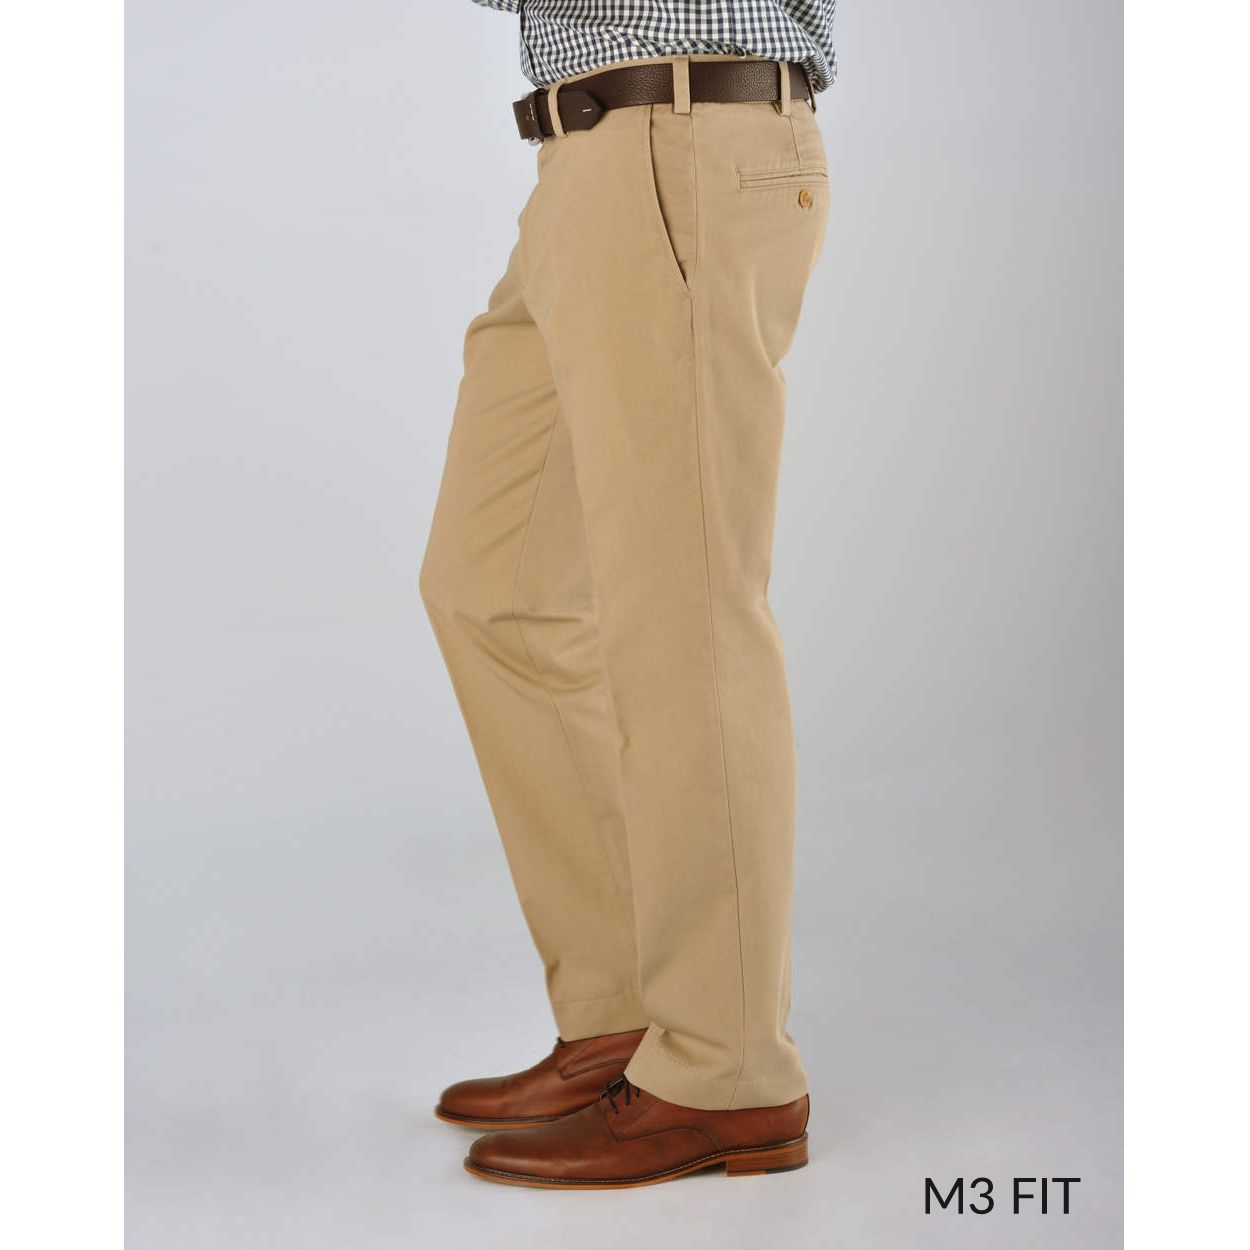 M3 Straight Fit Vintage Twills in Stone by Bills Khakis